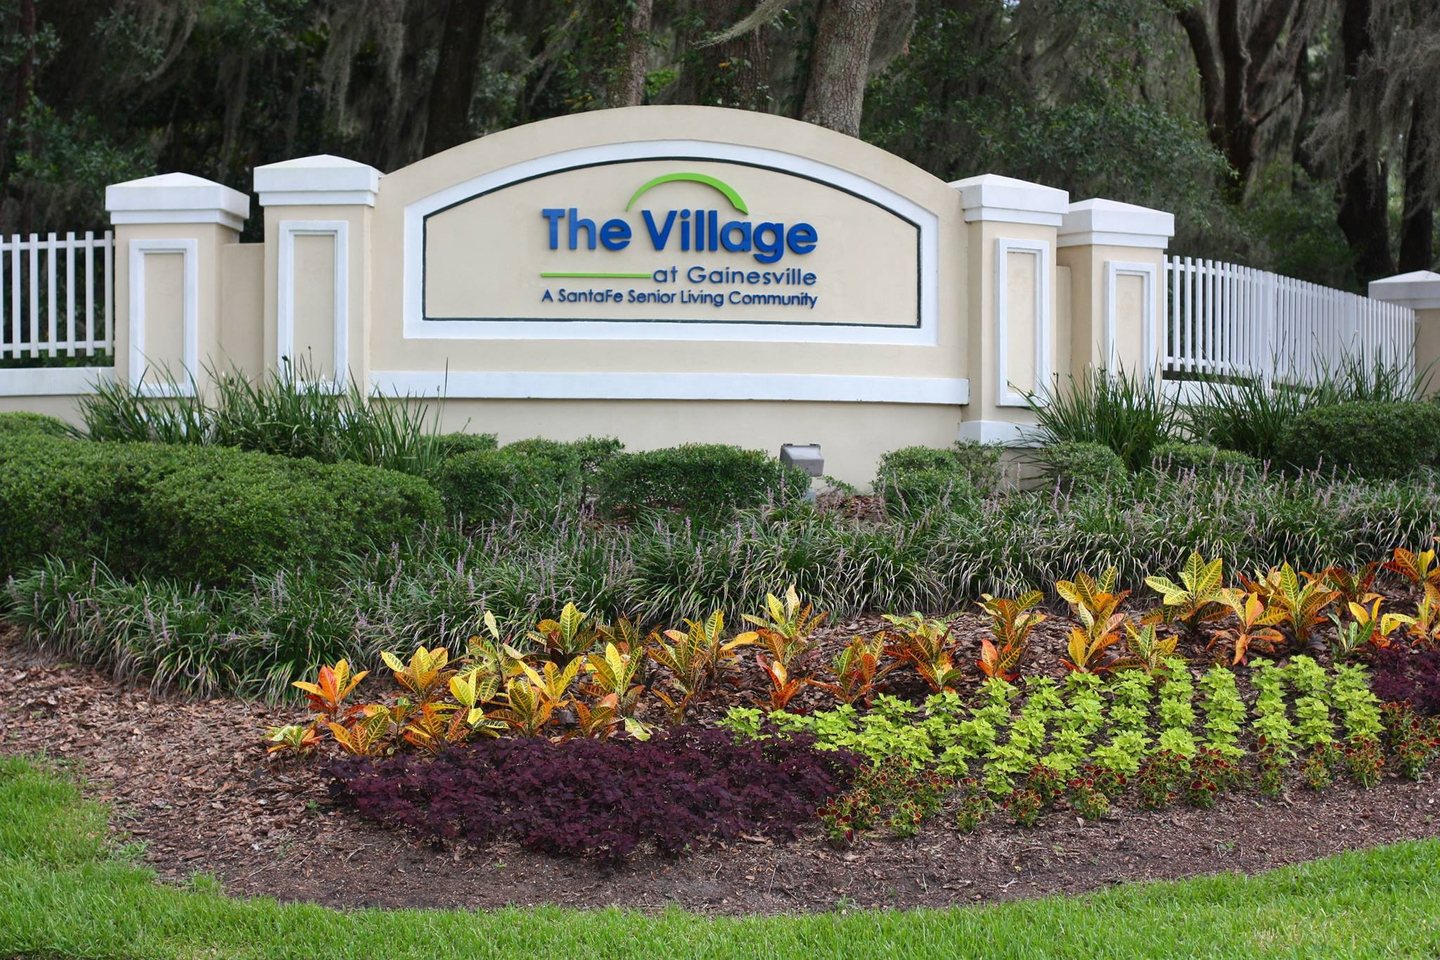 Entrance sign for the The Village at Gainesville - A SantaFe Senior Living Community